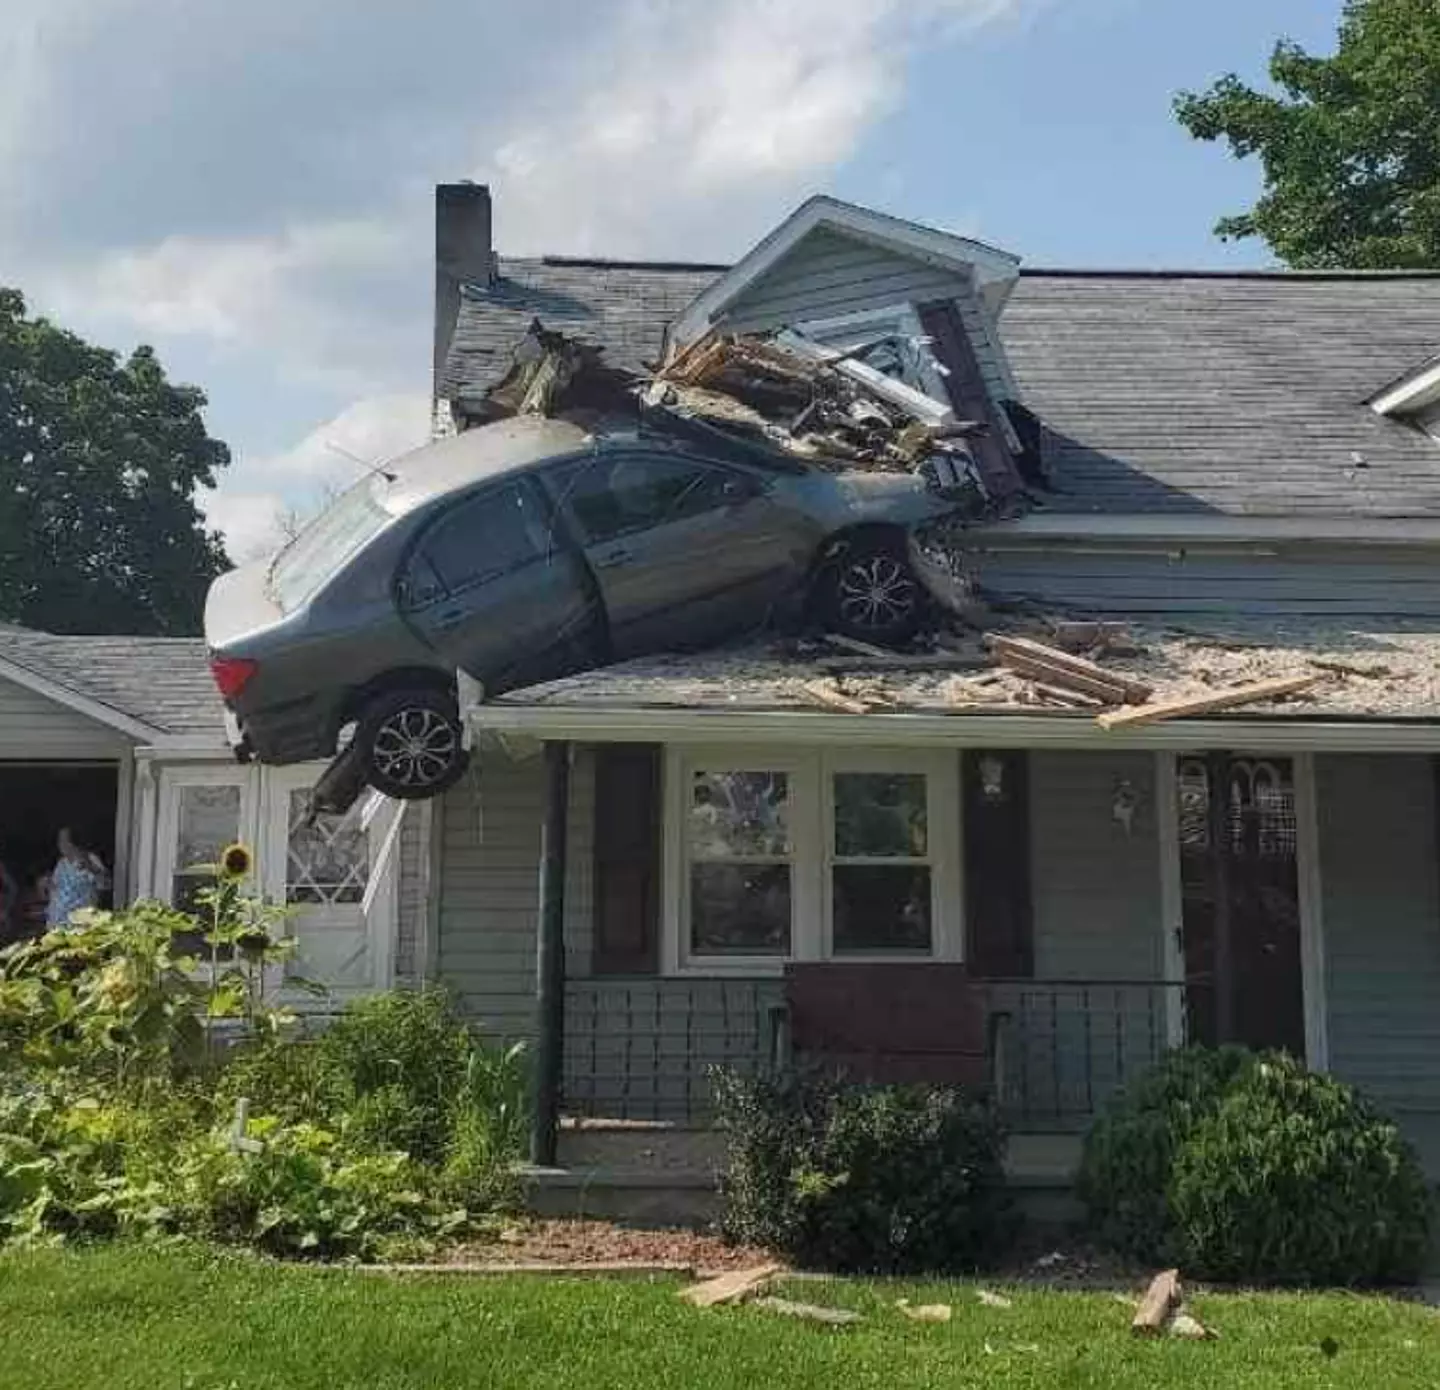 The car had managed to crash into the second storey of the house.